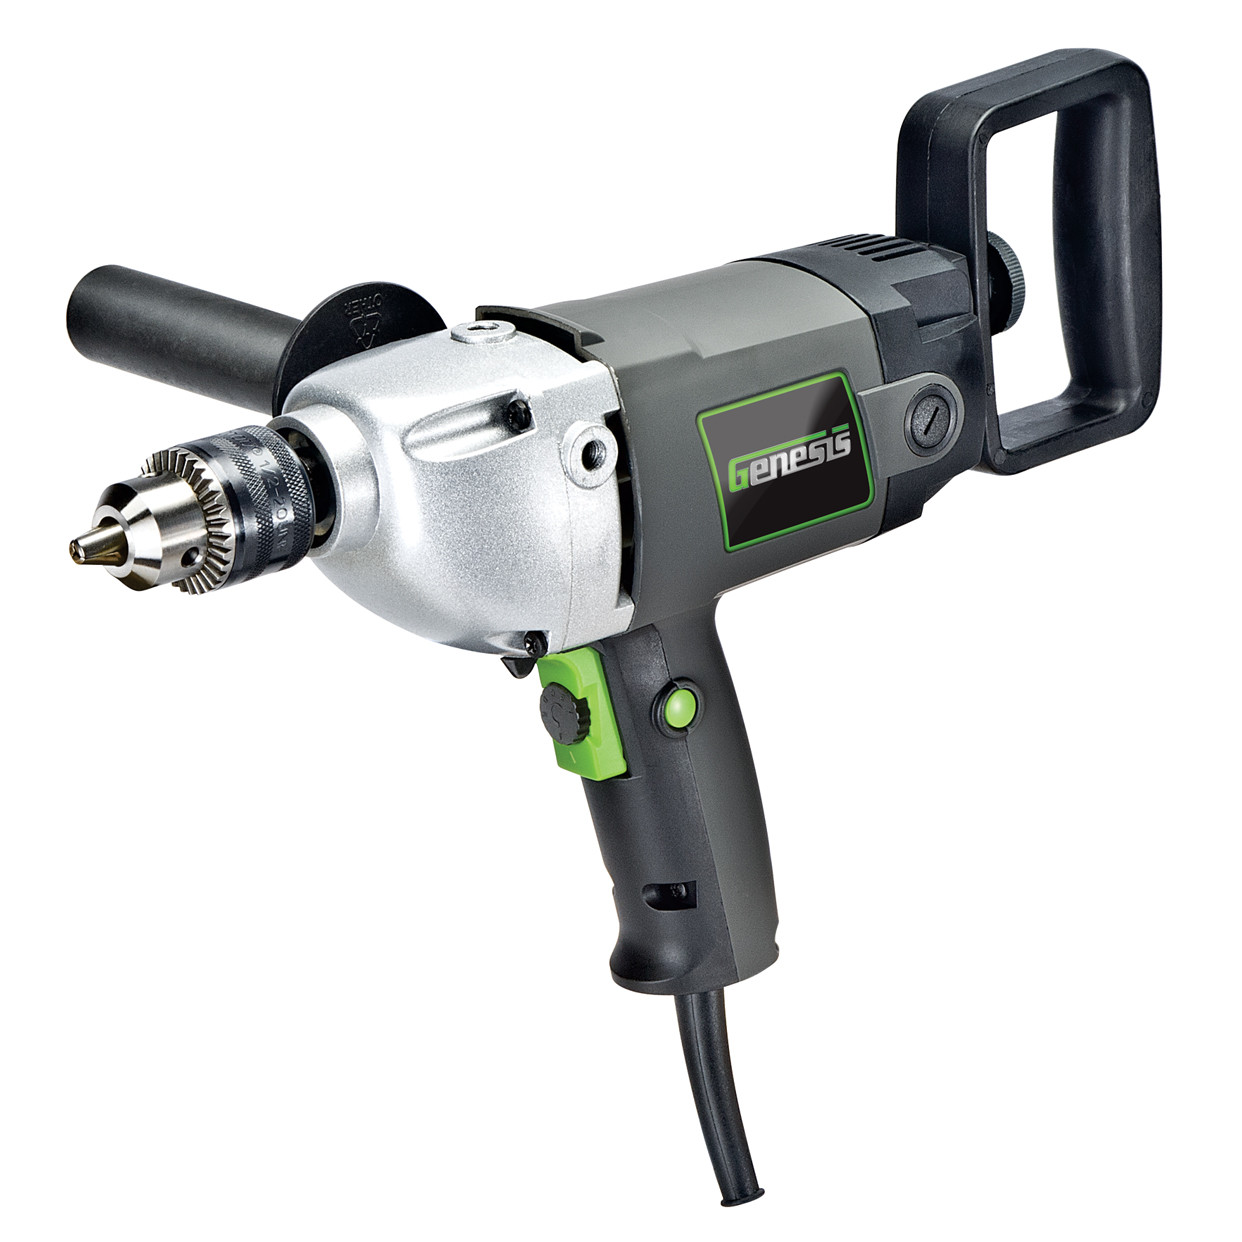 1/2" Spade-Handle Electric Drill